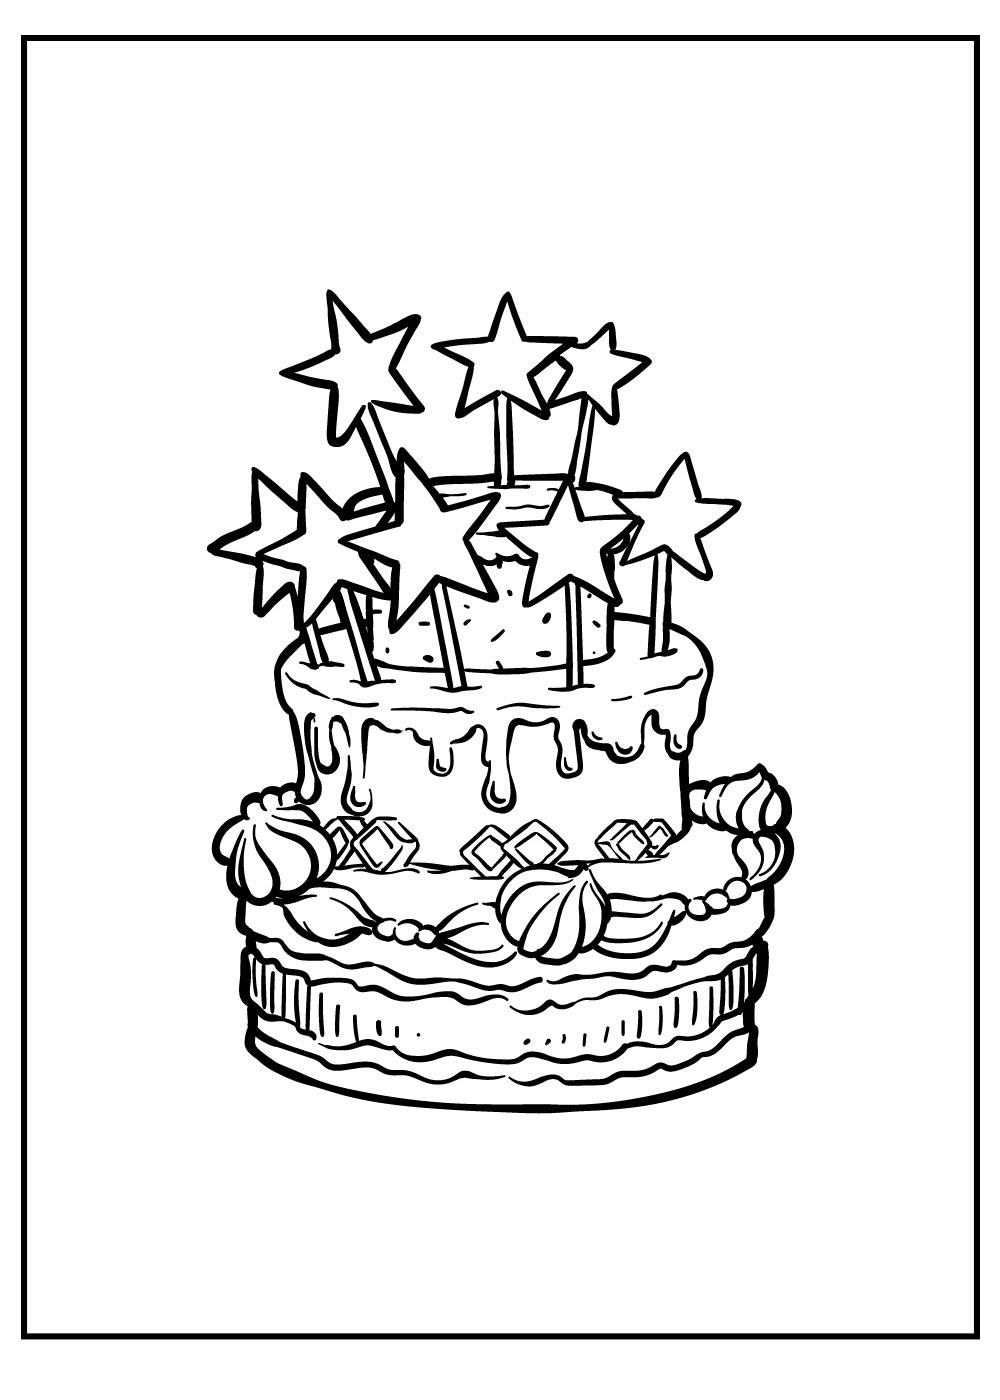 A Piece Of Birthday Cake And Flower Coloring Page